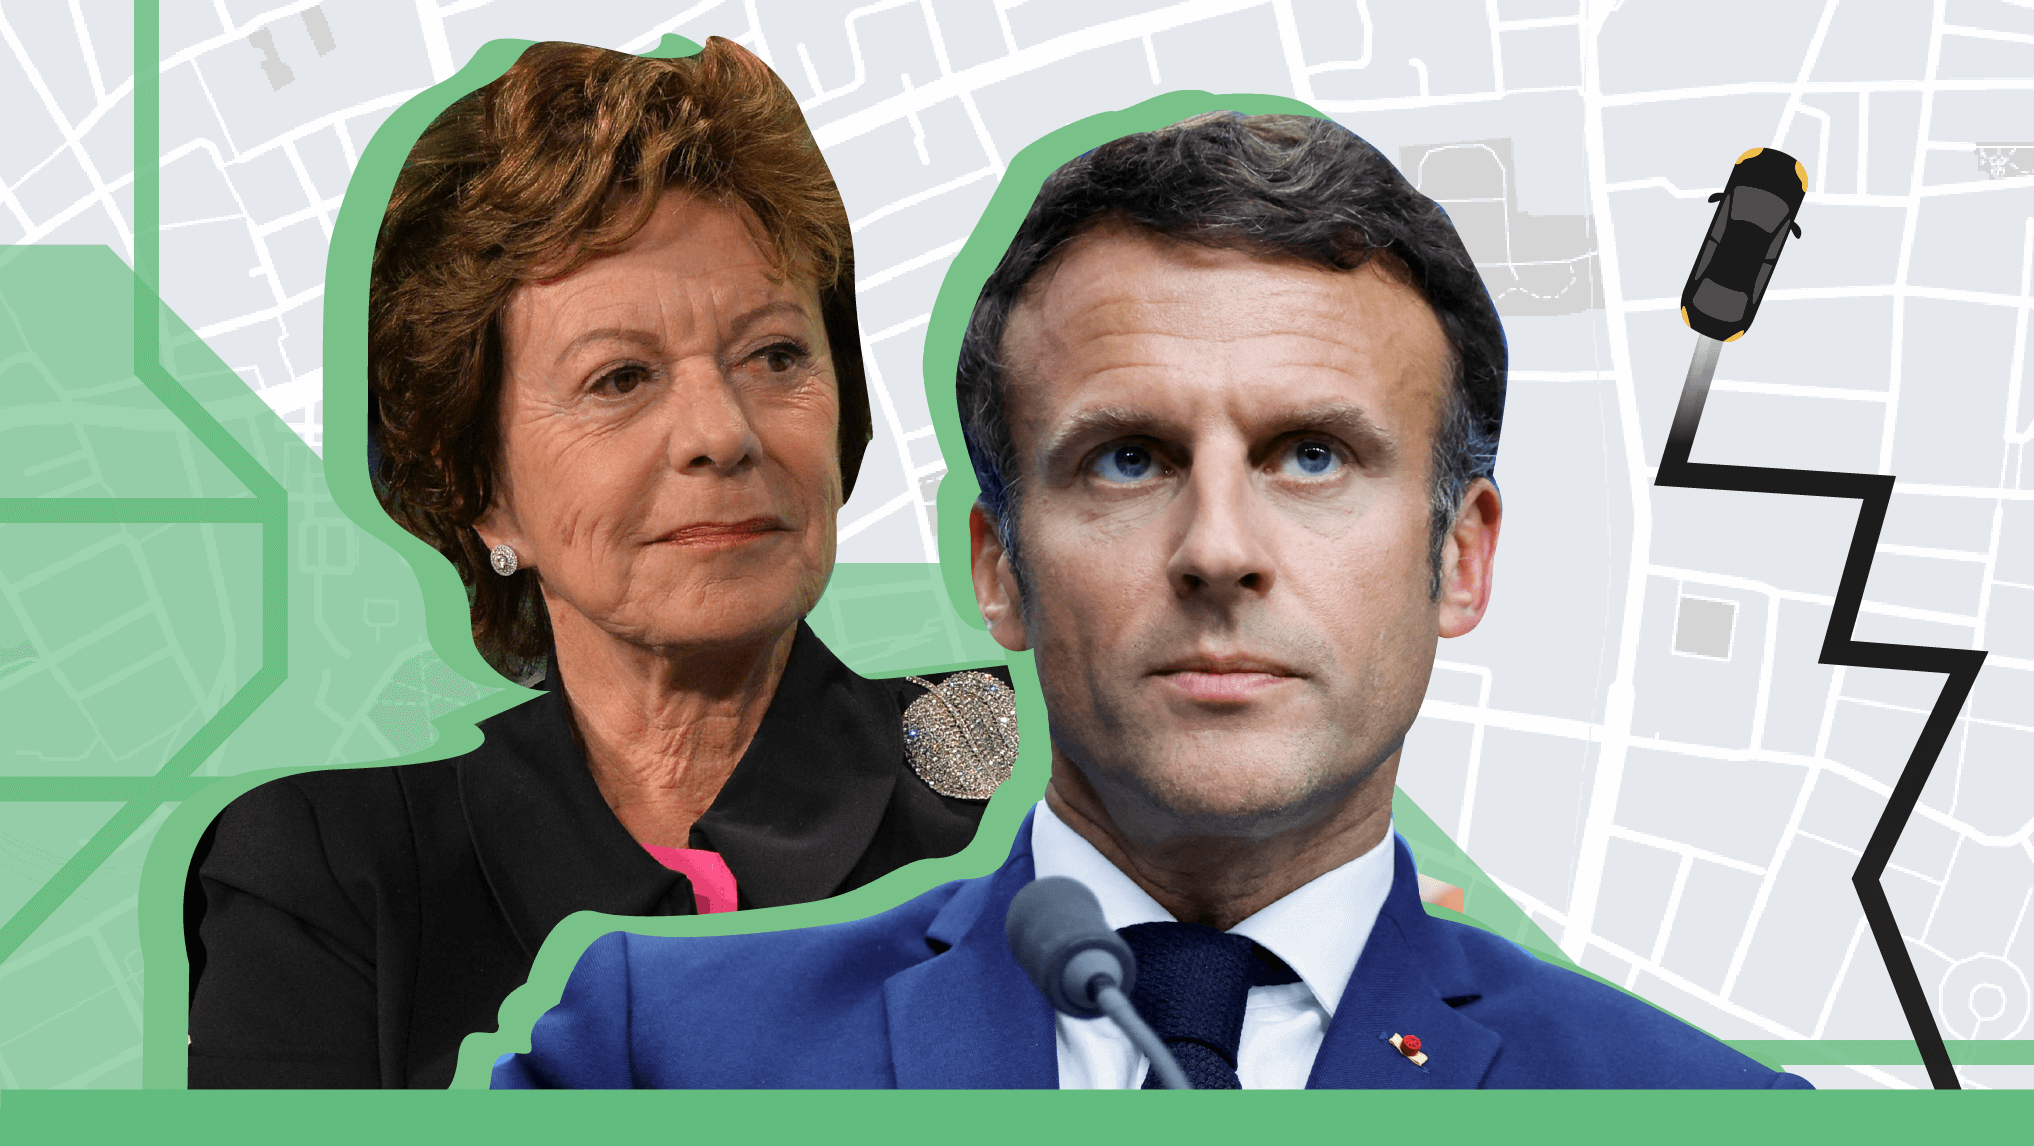 The files show Emmanuel Macron was on first name terms with Uber's founder while ex-EU commissioner Neelie Kroes secretly lobbied for the firm